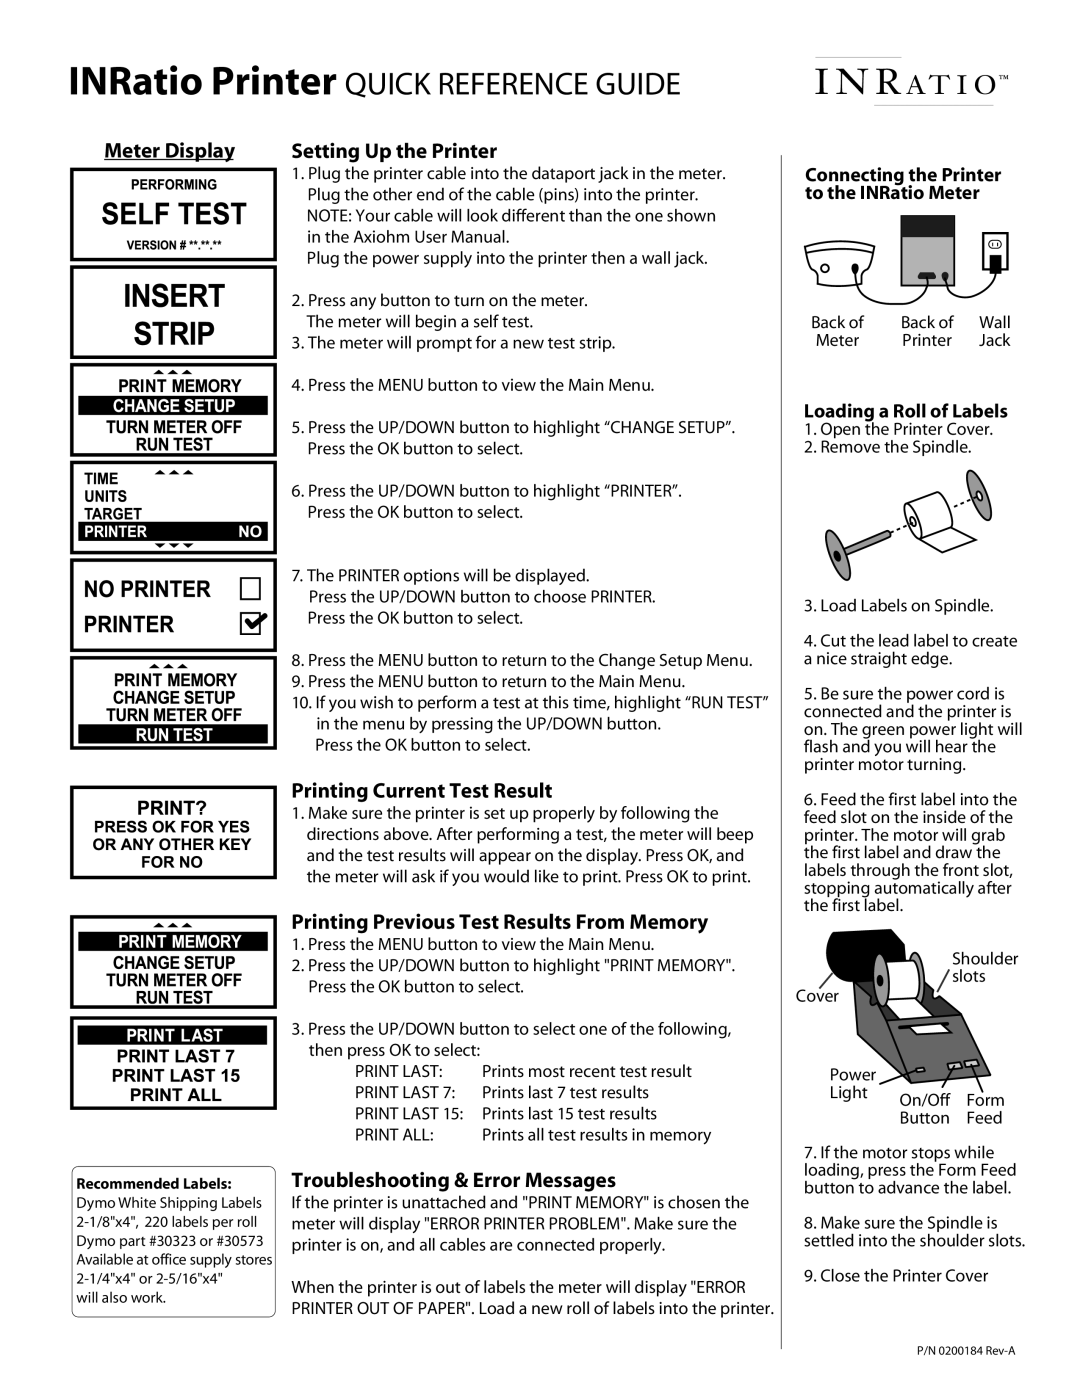 Dymo user manual INRatio Printer QUICK REFERENCE GUIDE, Meter Display, Setting Up the Printer, Loading a Roll of Labels 